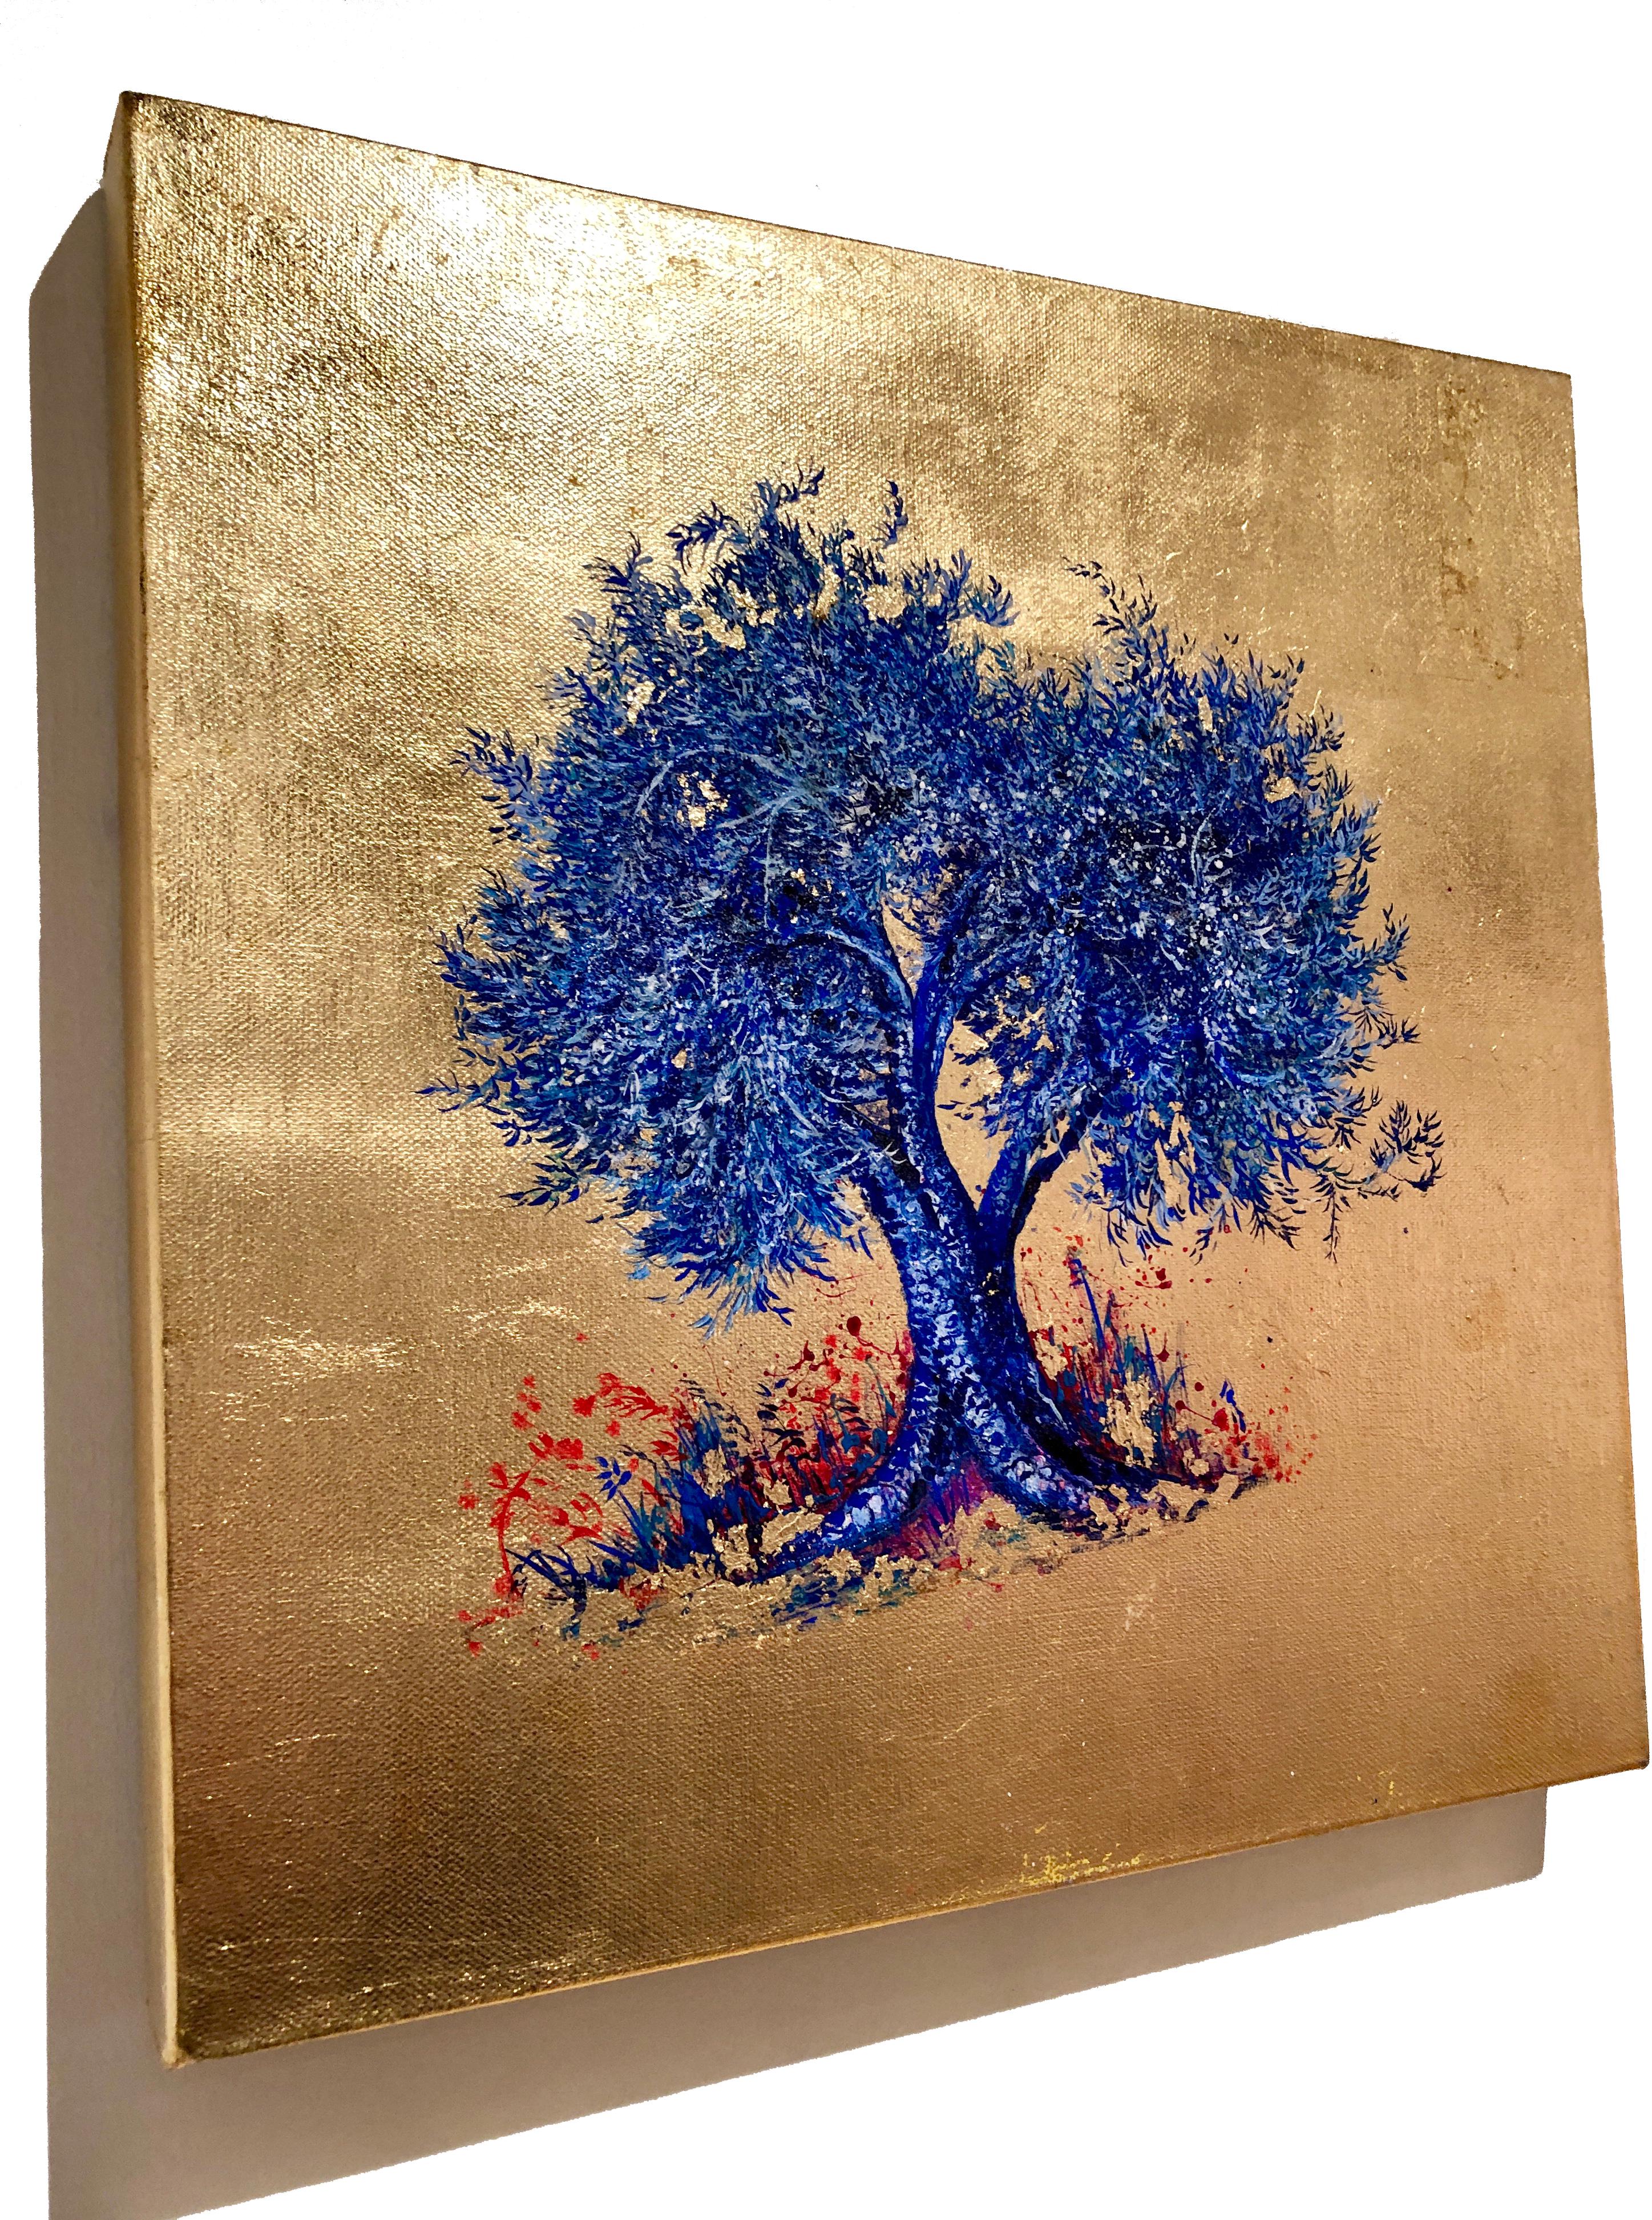 This is a gorgeous oil and gold leaf on canvas 15.75x15.75x1.5 inches / 40x40x4 cm
The painting is available unframed for $950
- Artwork Framed: 18x18x2 inches / 50x50x6cm, custom black and gold trim wood frame for $1100

This is a stunning and